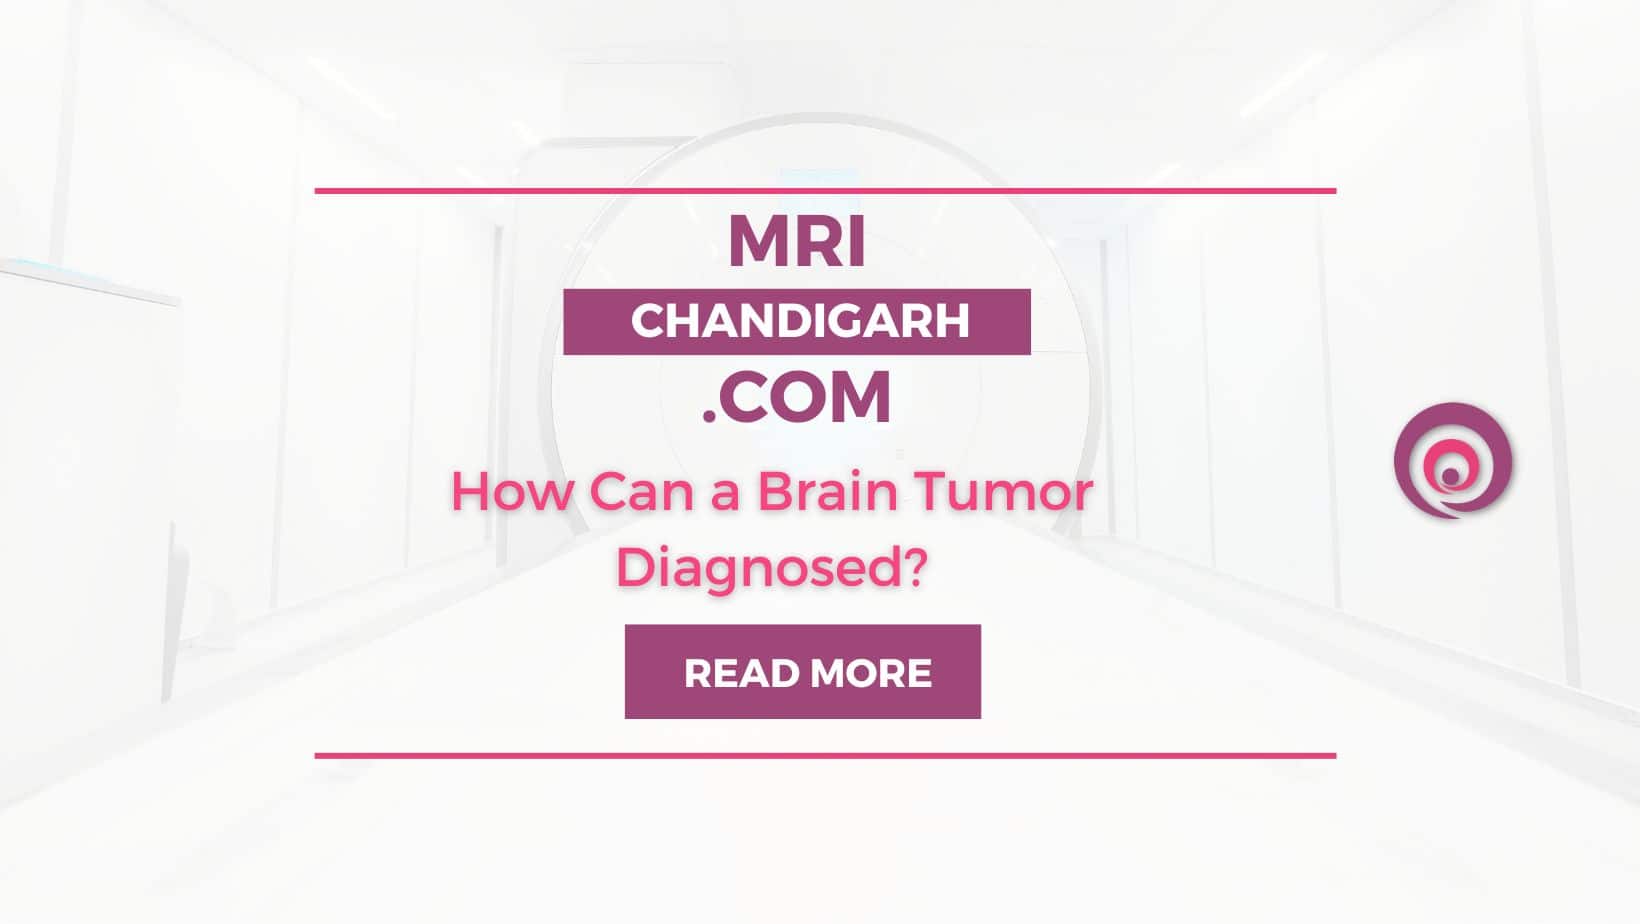 How Can a Brain Tumor Diagnosed?